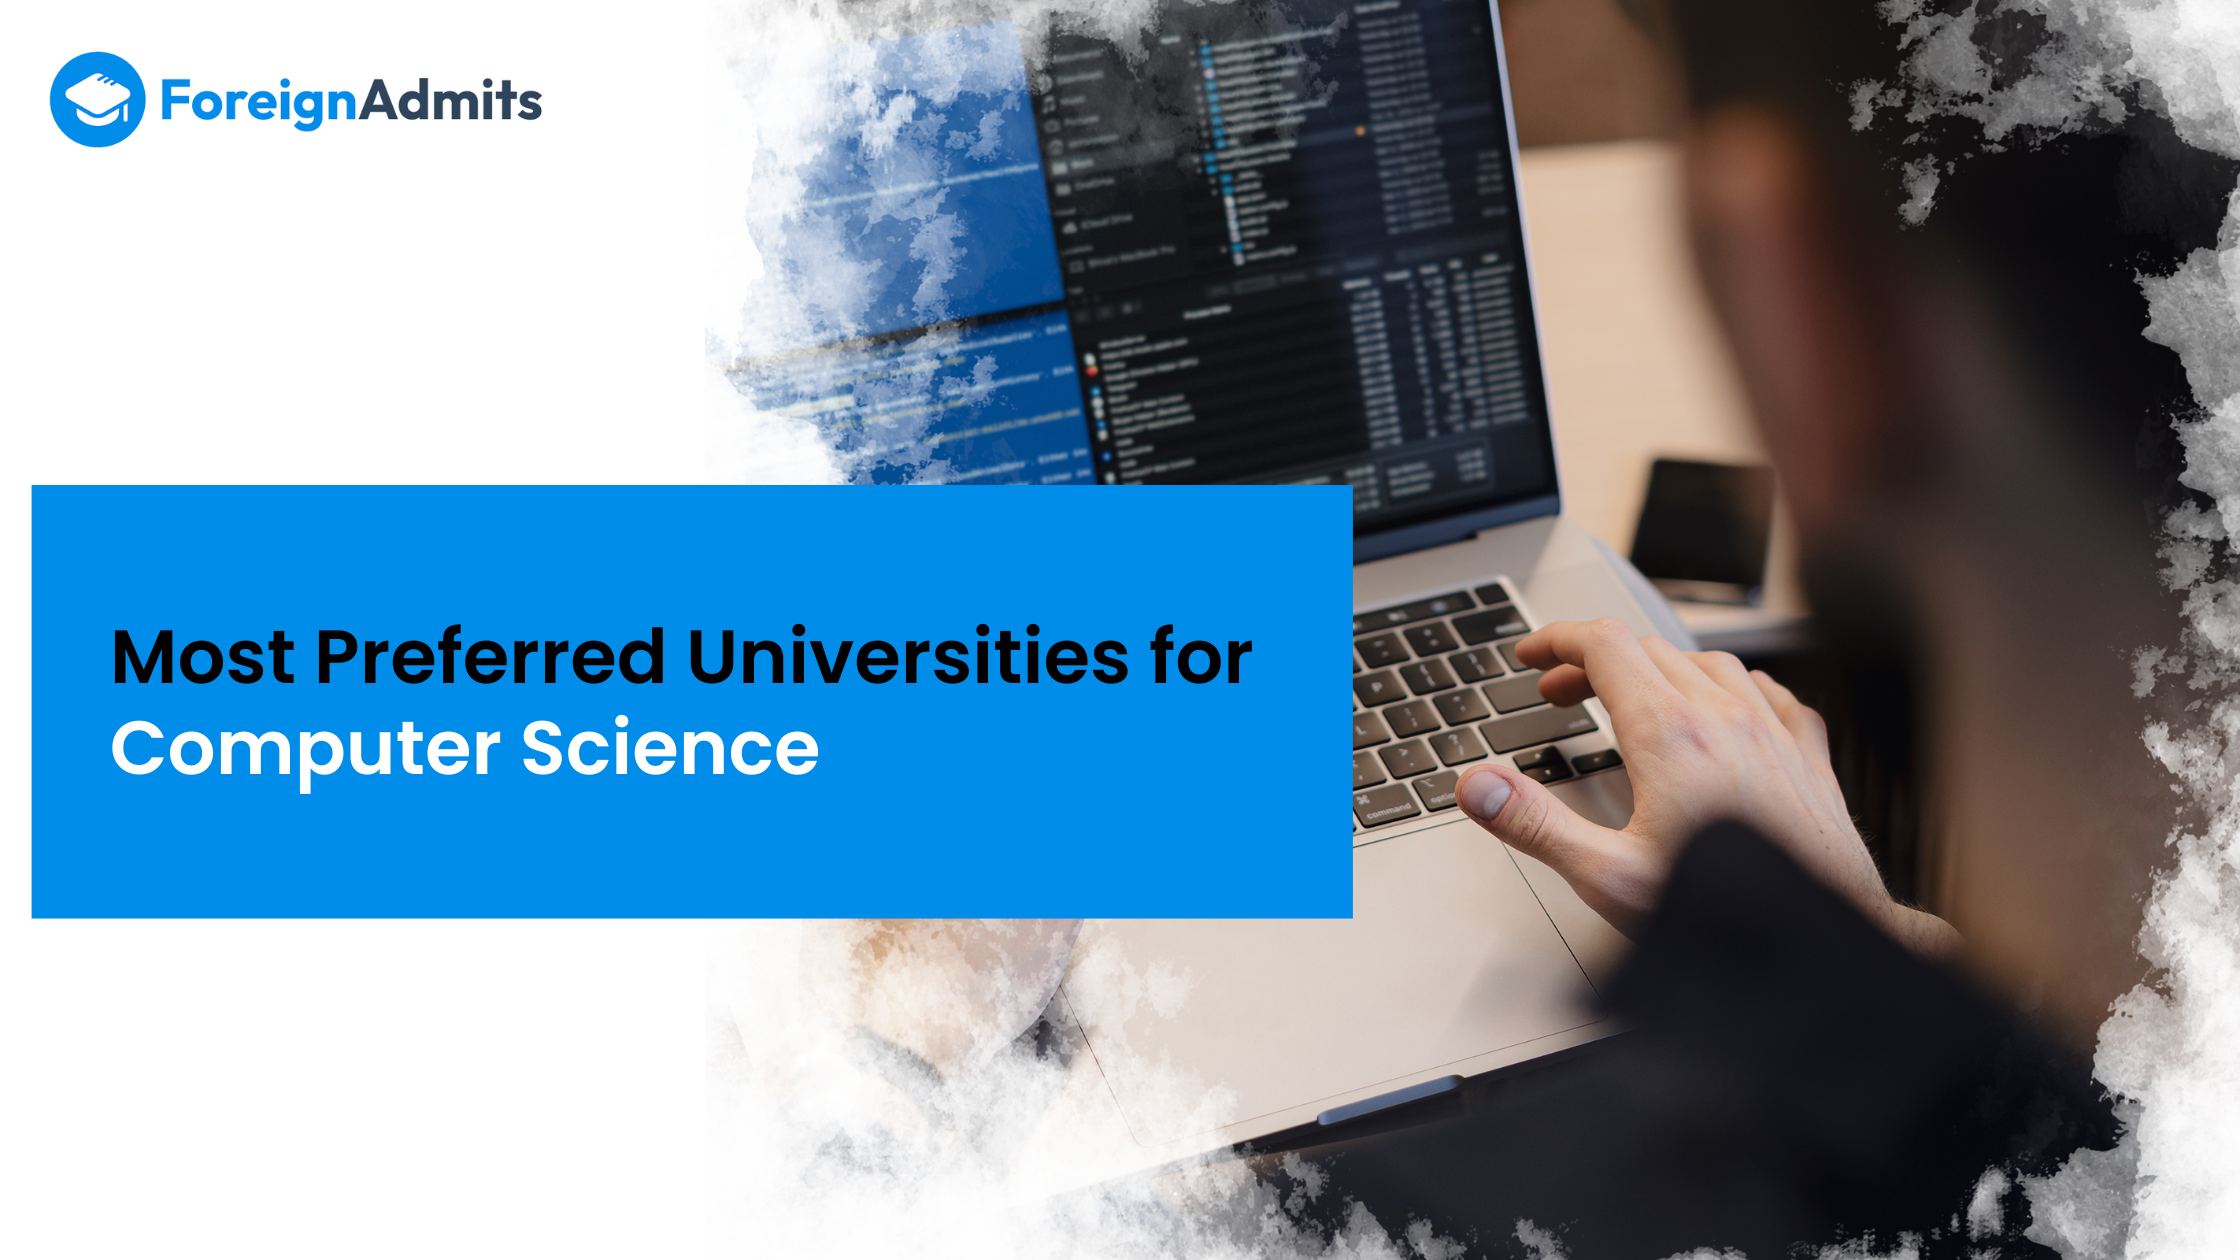 Most Preferred Universities for Computer Science